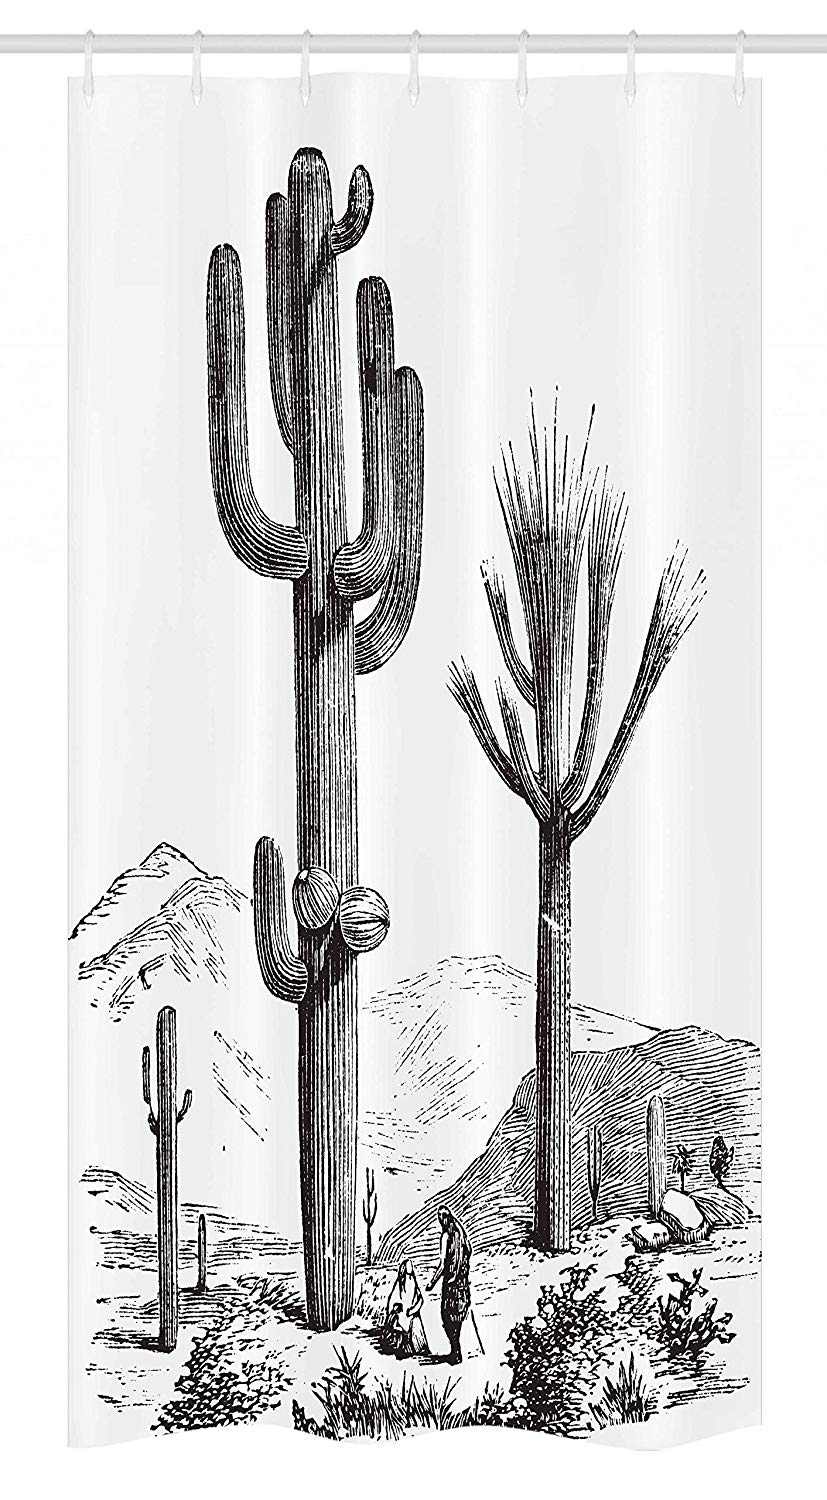 Ambesonne Cactus Stall Shower Curtain, Sketchy Hand Drawn Print of Desert Plants with Mexican Travellers Image, Fabric Bathroom Decor Set with Hooks, 36" X 72", Charcoal Grey